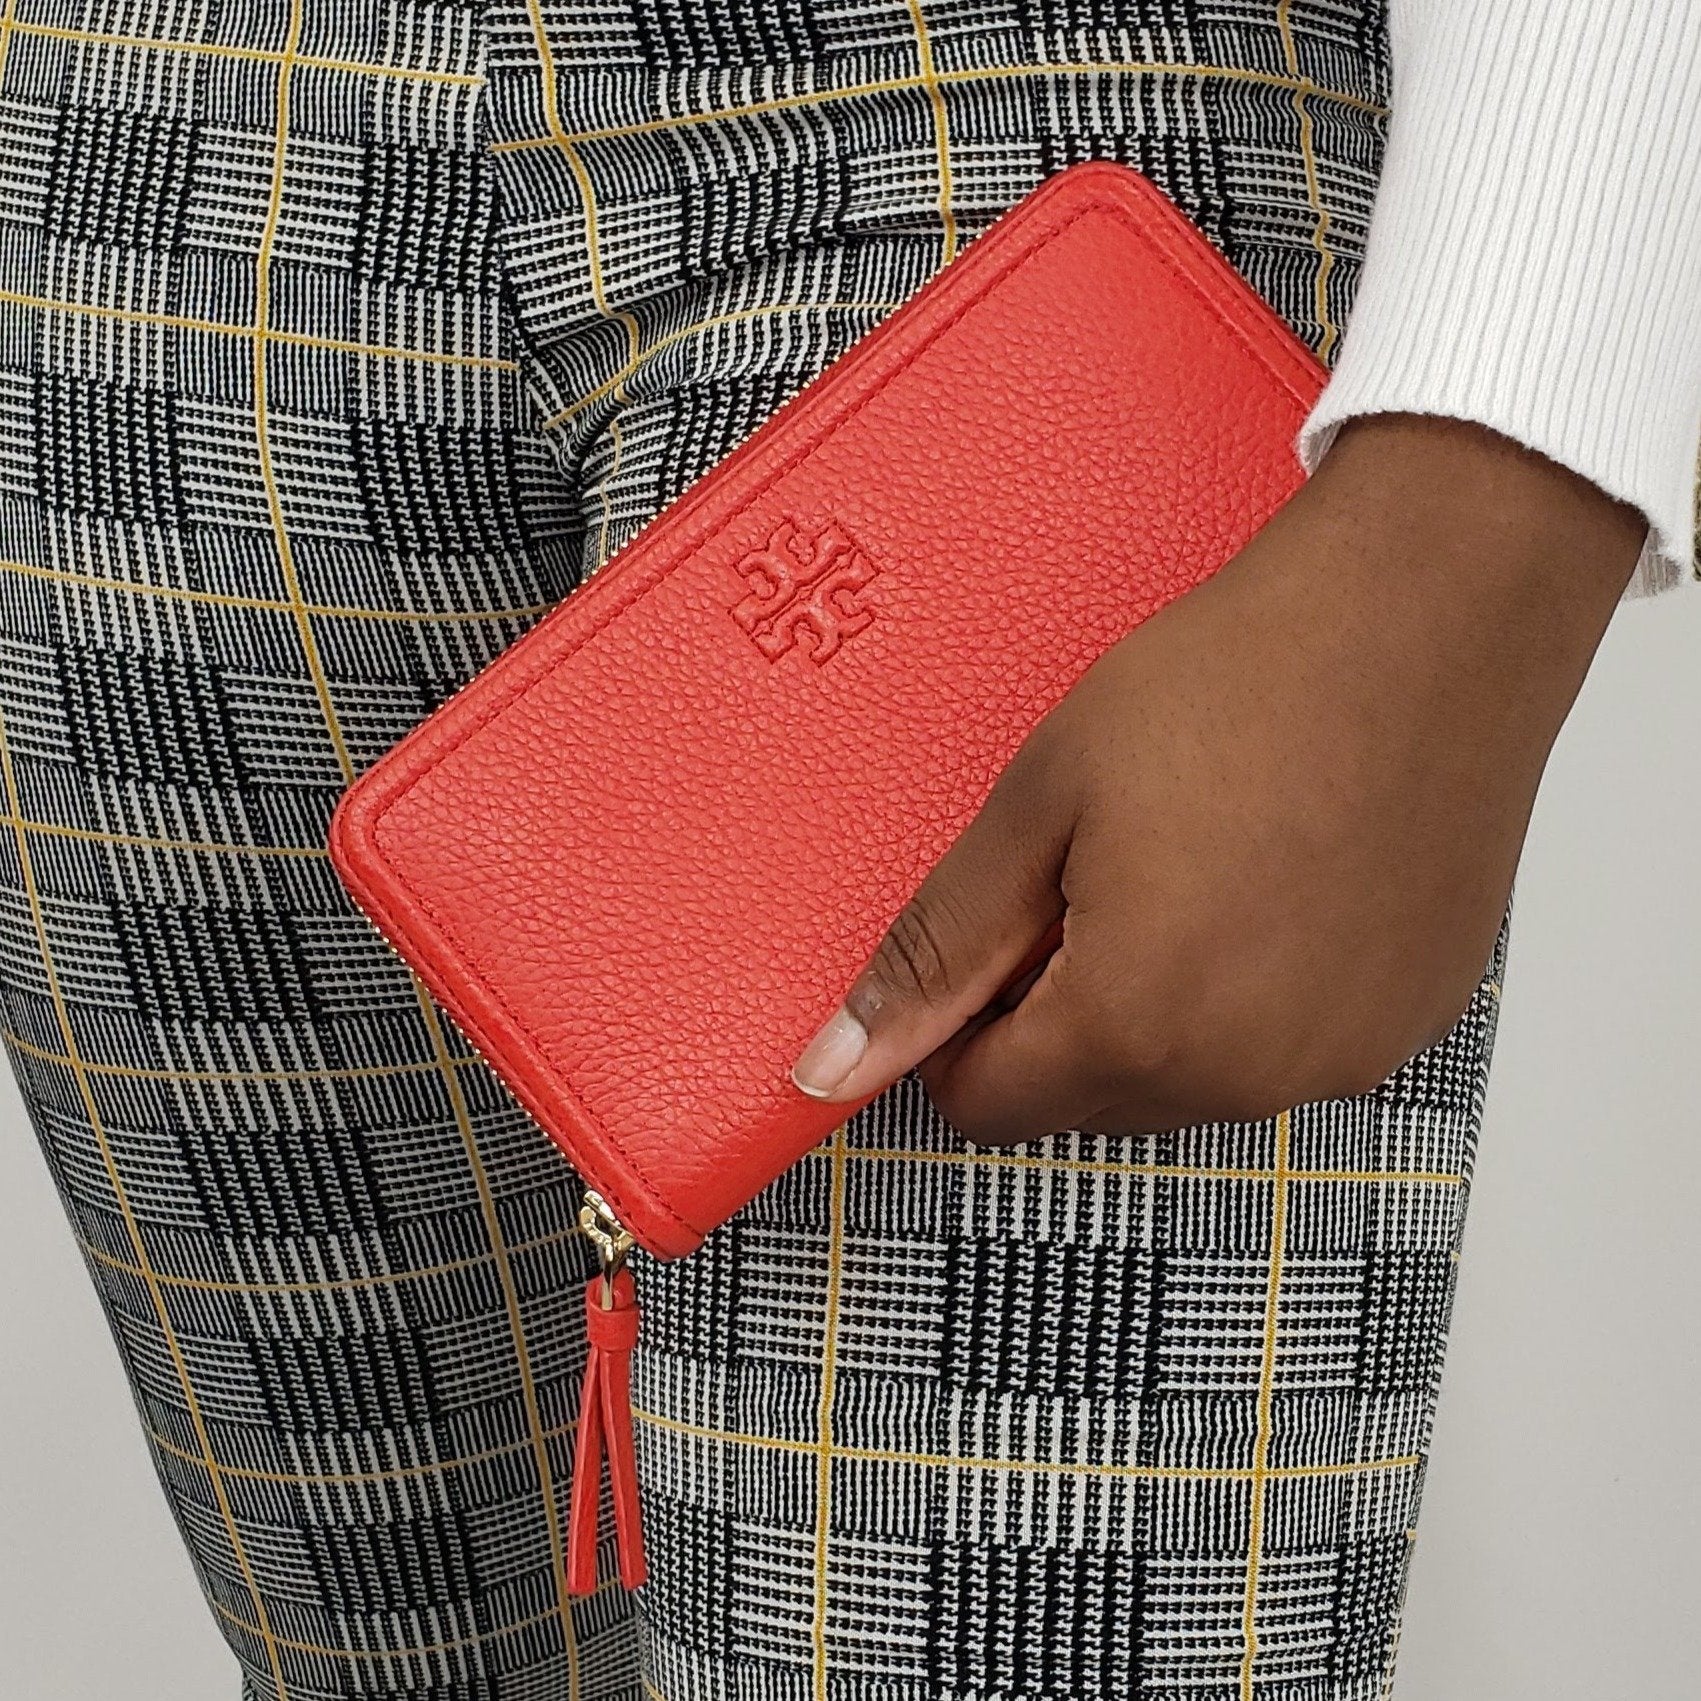 Tory Burch Thea Zip Continental Wallet in Brilliant Red – 